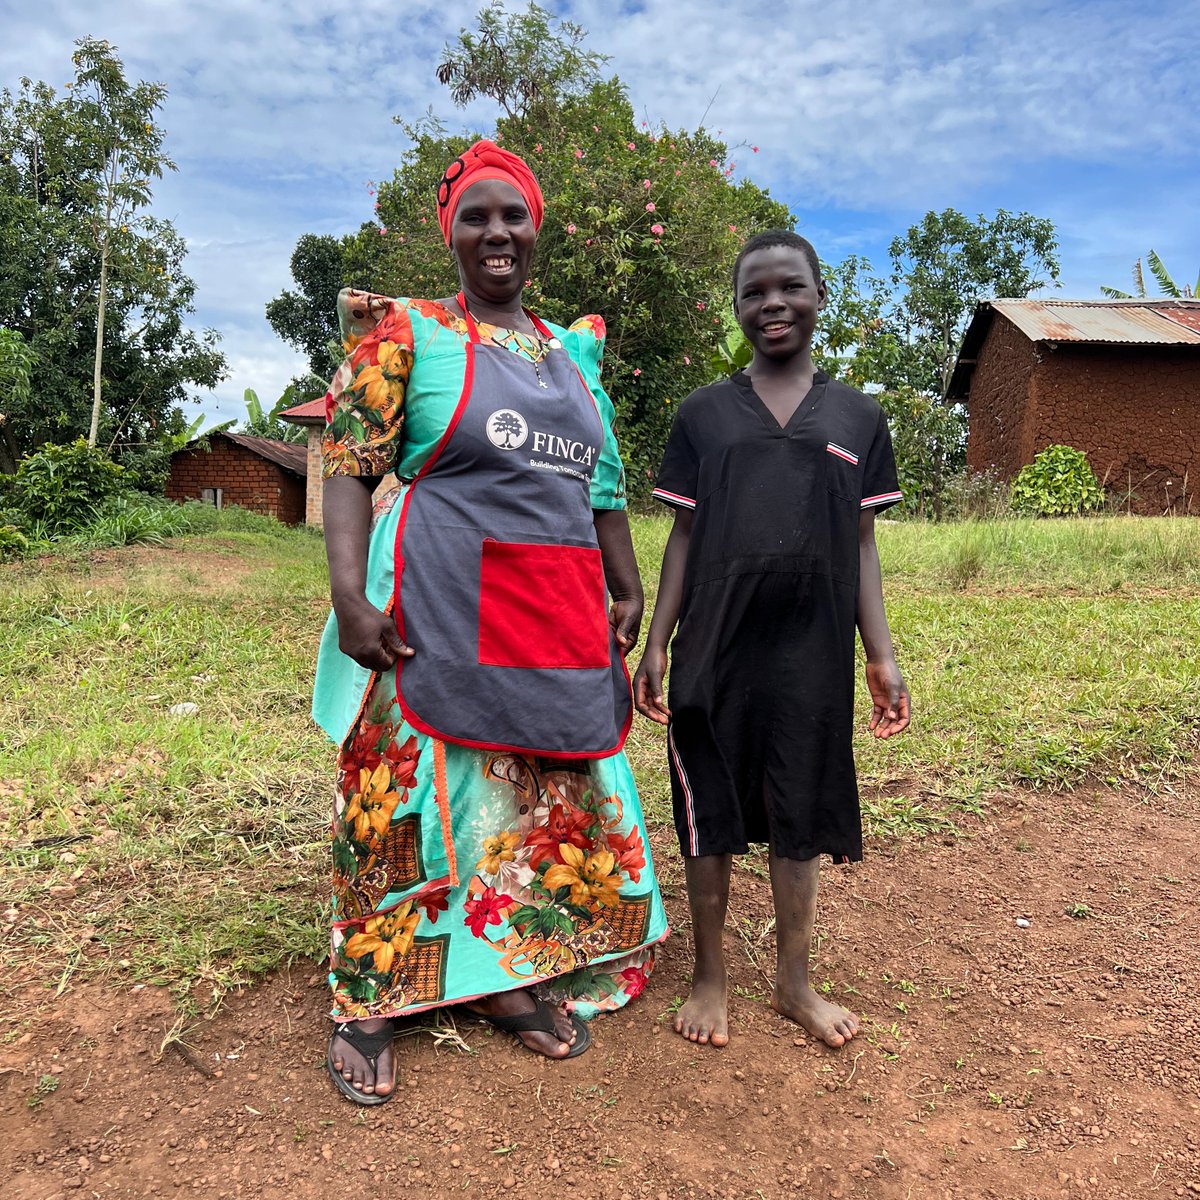 This #InternationalDayfortheEradicationofPoverty, we applaud clients like Resty Musoke. A @FINCA_Uganda customer of more than 20 years, Resty has invested in her farm, paid school fees for children & grandchildren, improved her family's home, and supported her community.